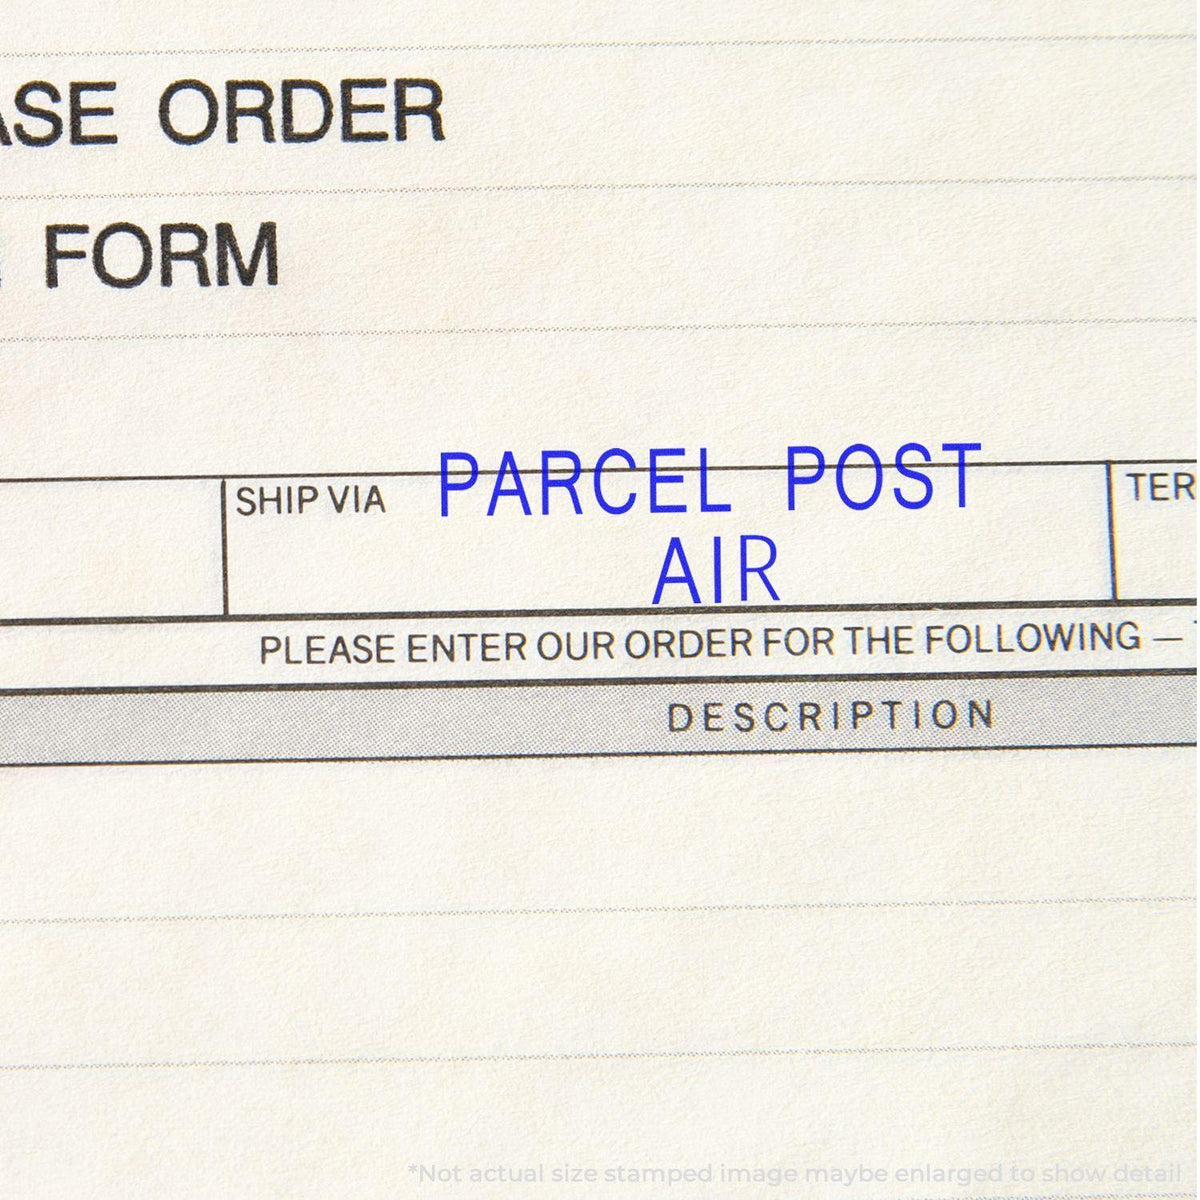 In Use Large Parcel Post Air Rubber Stamp Image